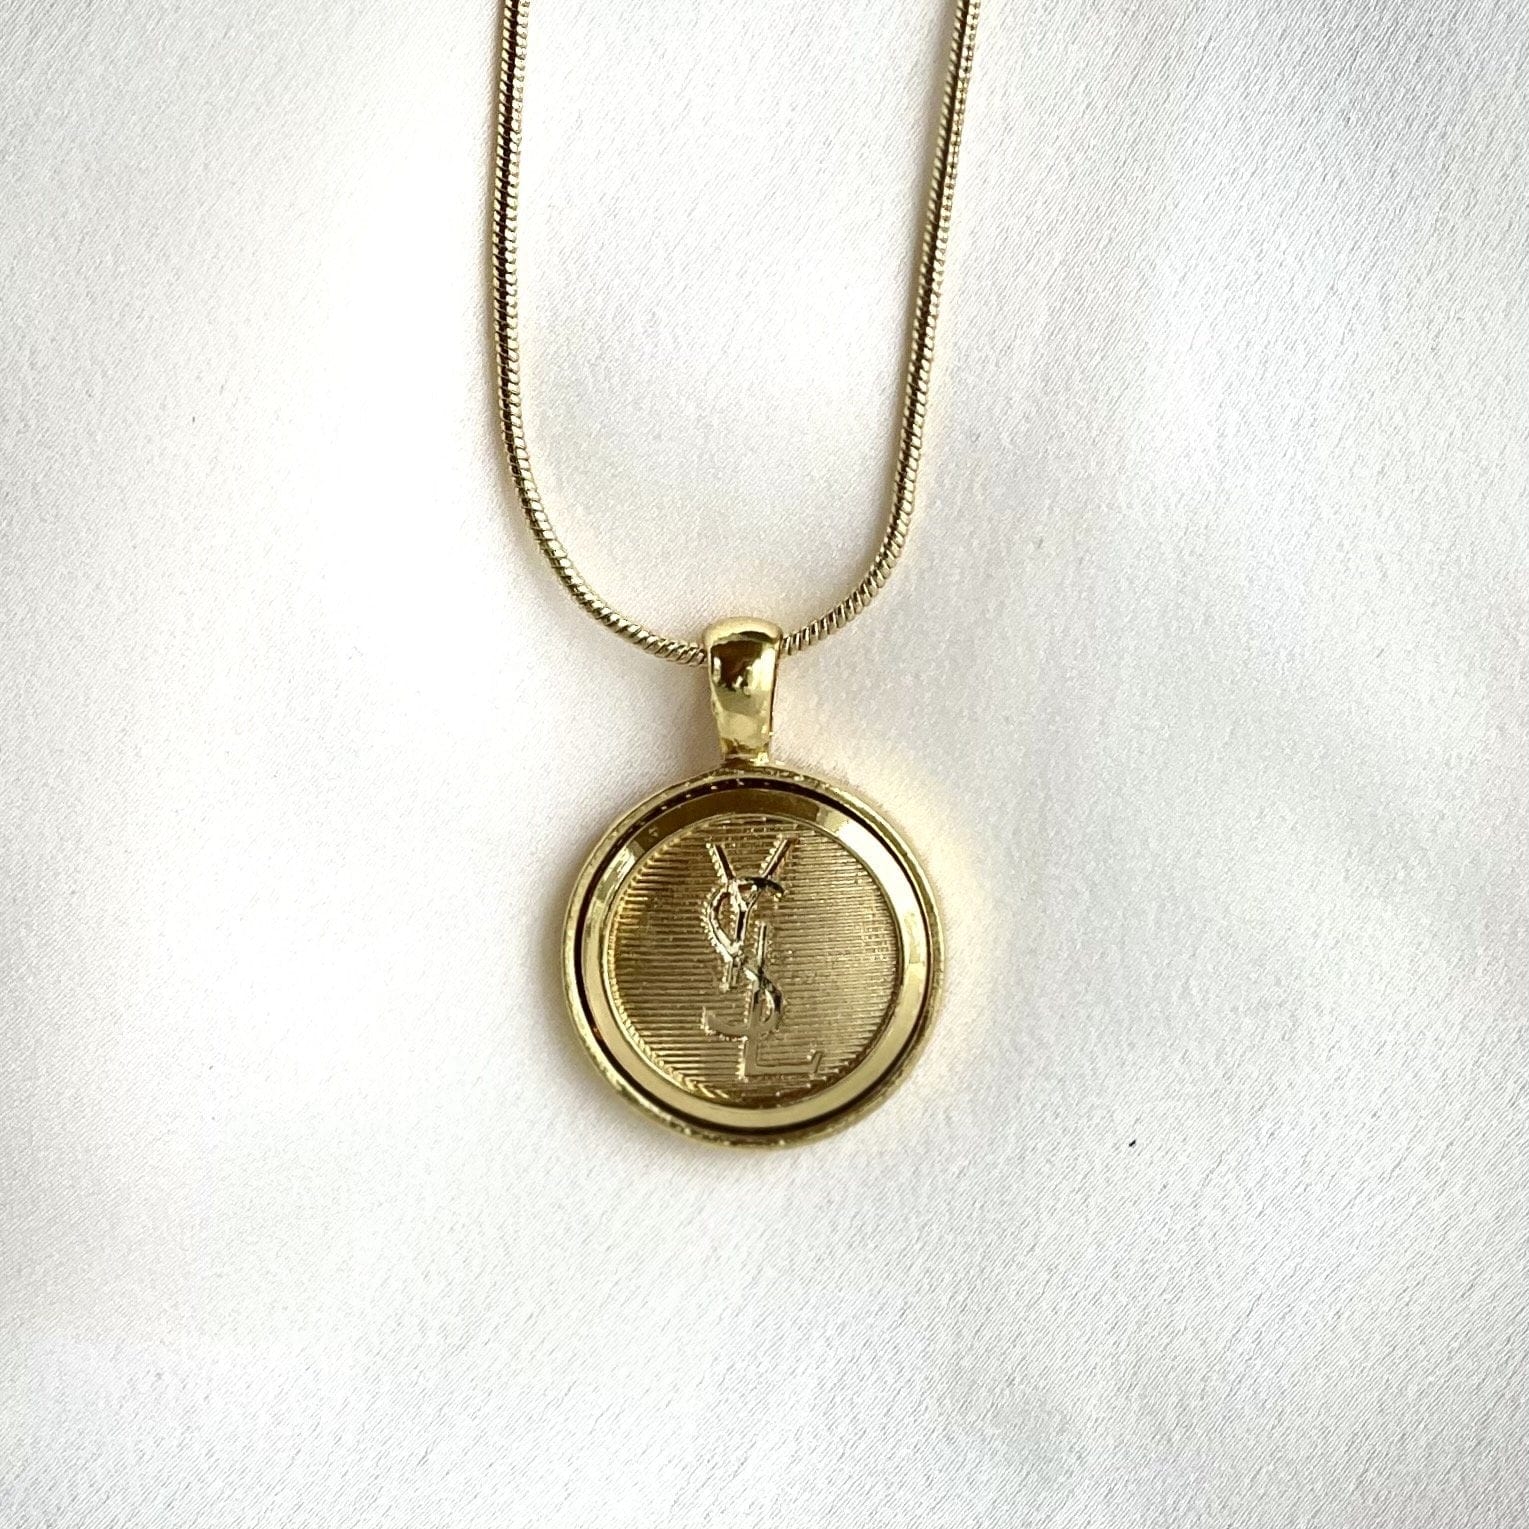 Ysl Gold Repurposed Vintage Button Necklace